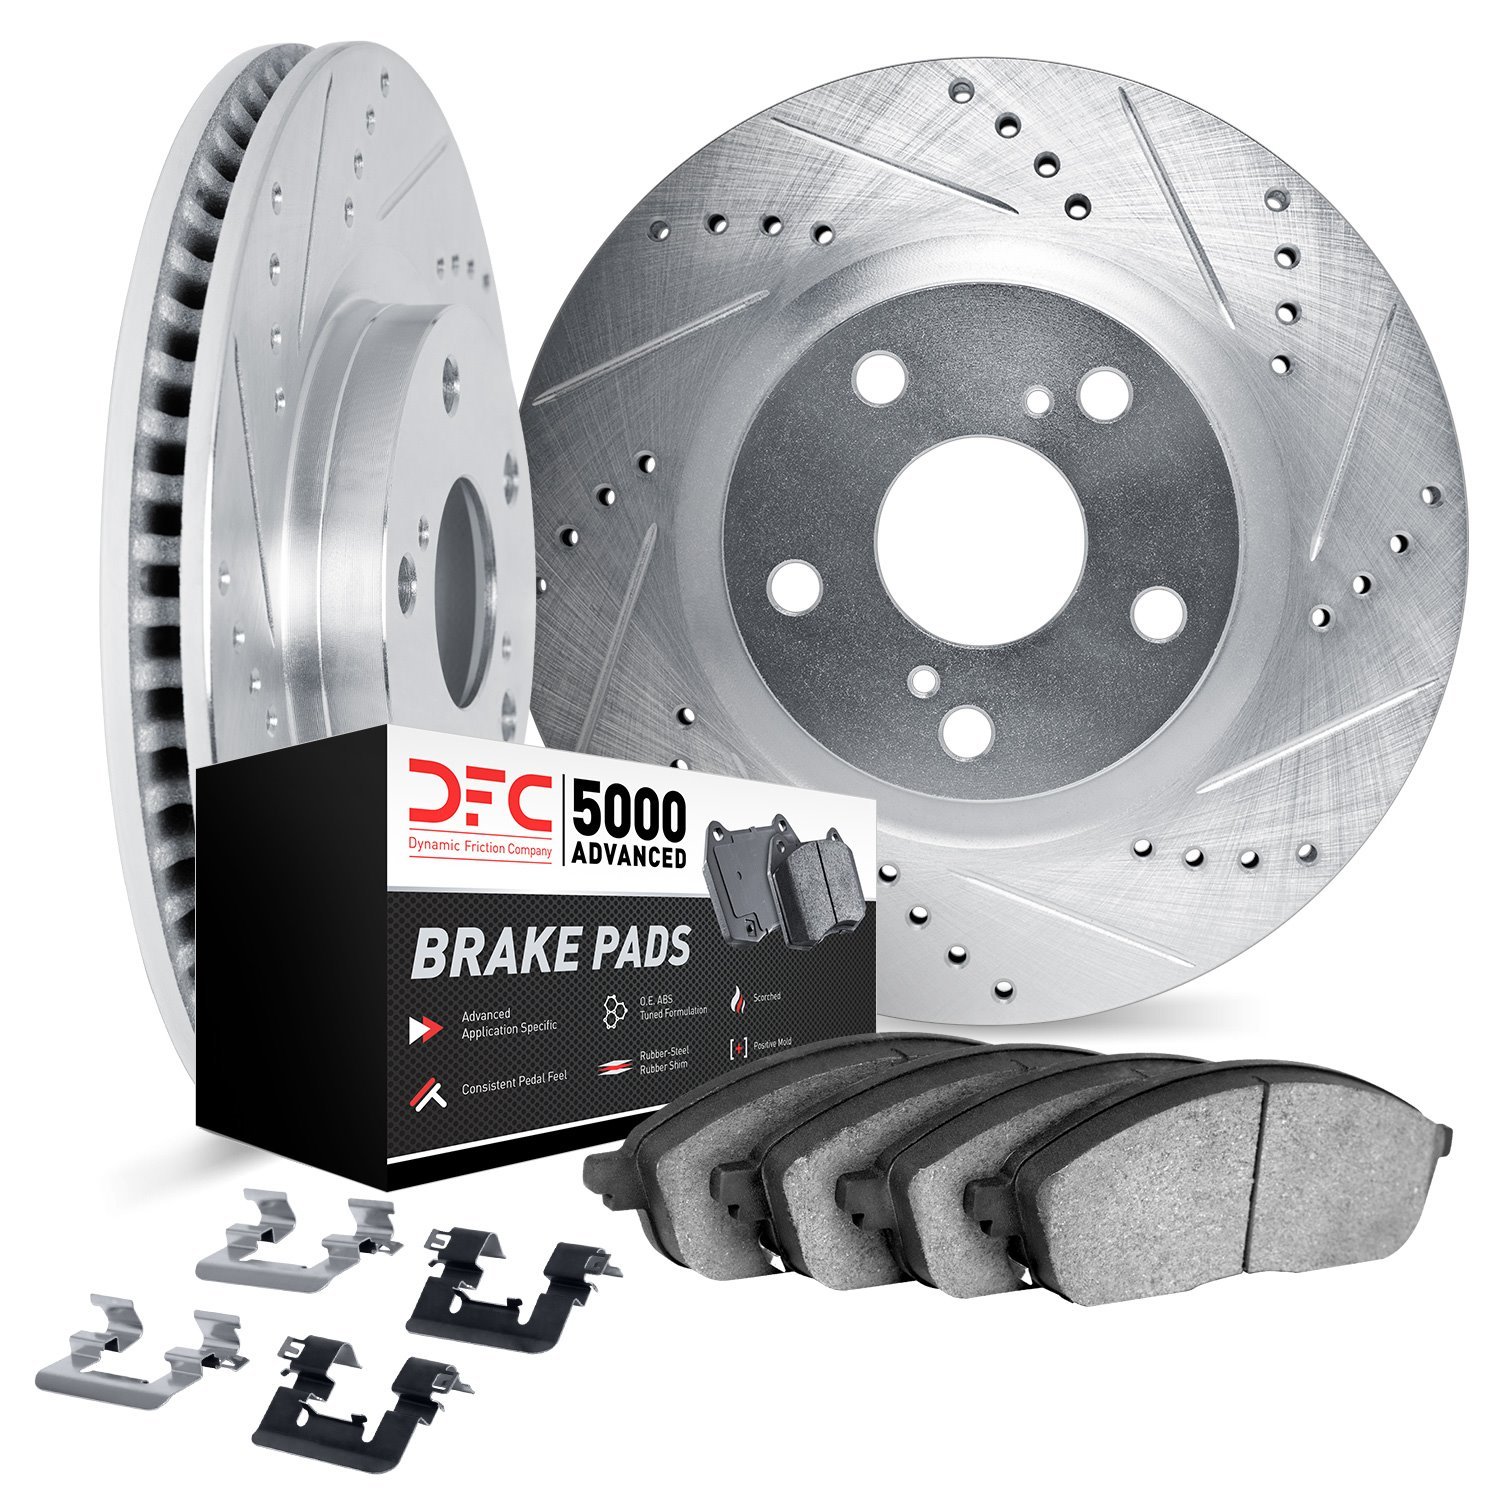 7512-68016 Drilled/Slotted Brake Rotors w/5000 Advanced Brake Pads Kit & Hardware [Silver], Fits Select Infiniti/Nissan, Positio